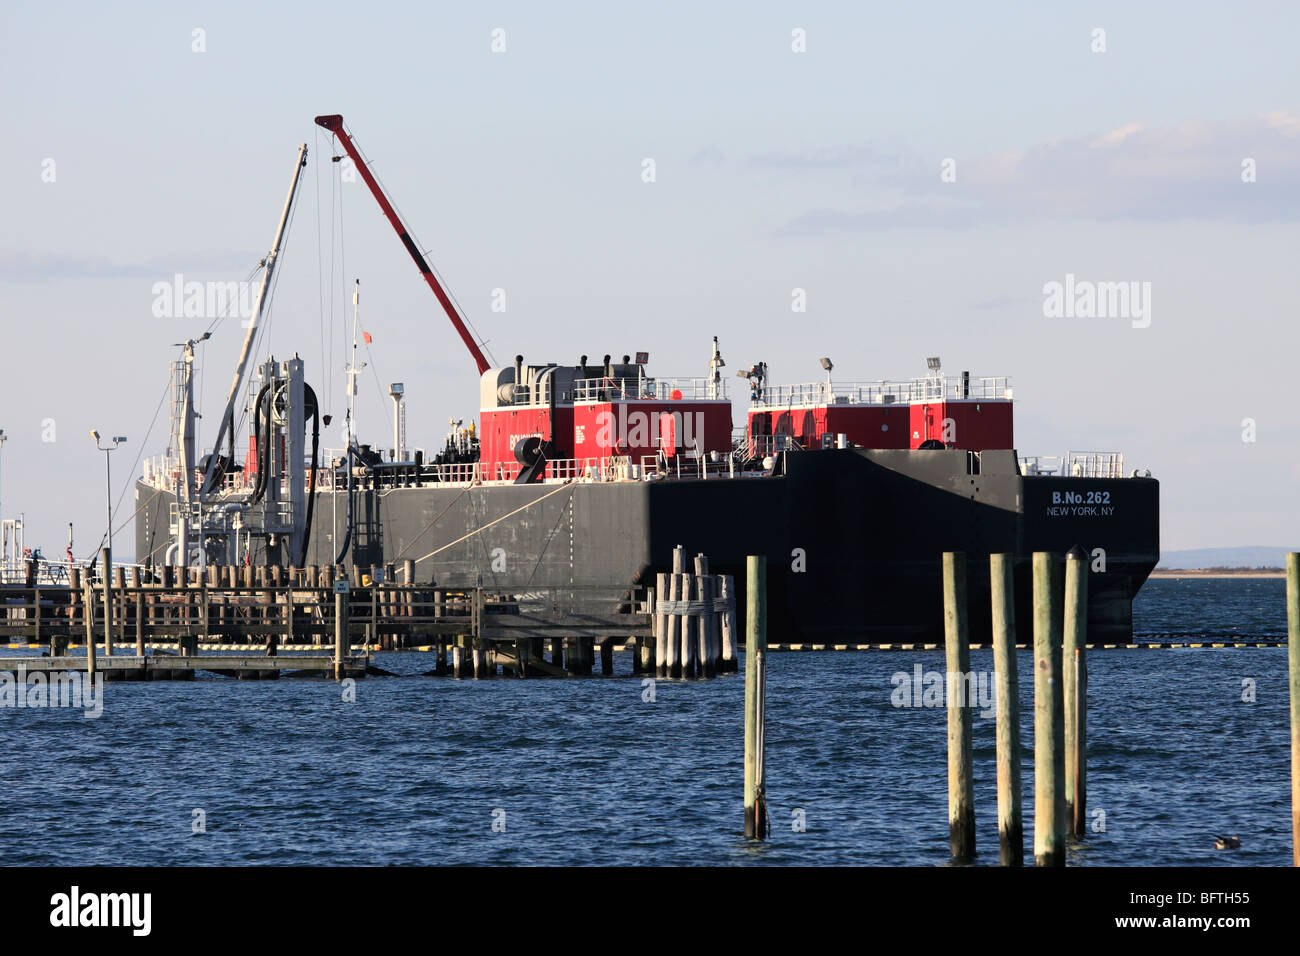 A double hulled oil tank barge unloads its cargo of of oil at power generating plant, Port Jefferson, Long Island, NY Stock Photo